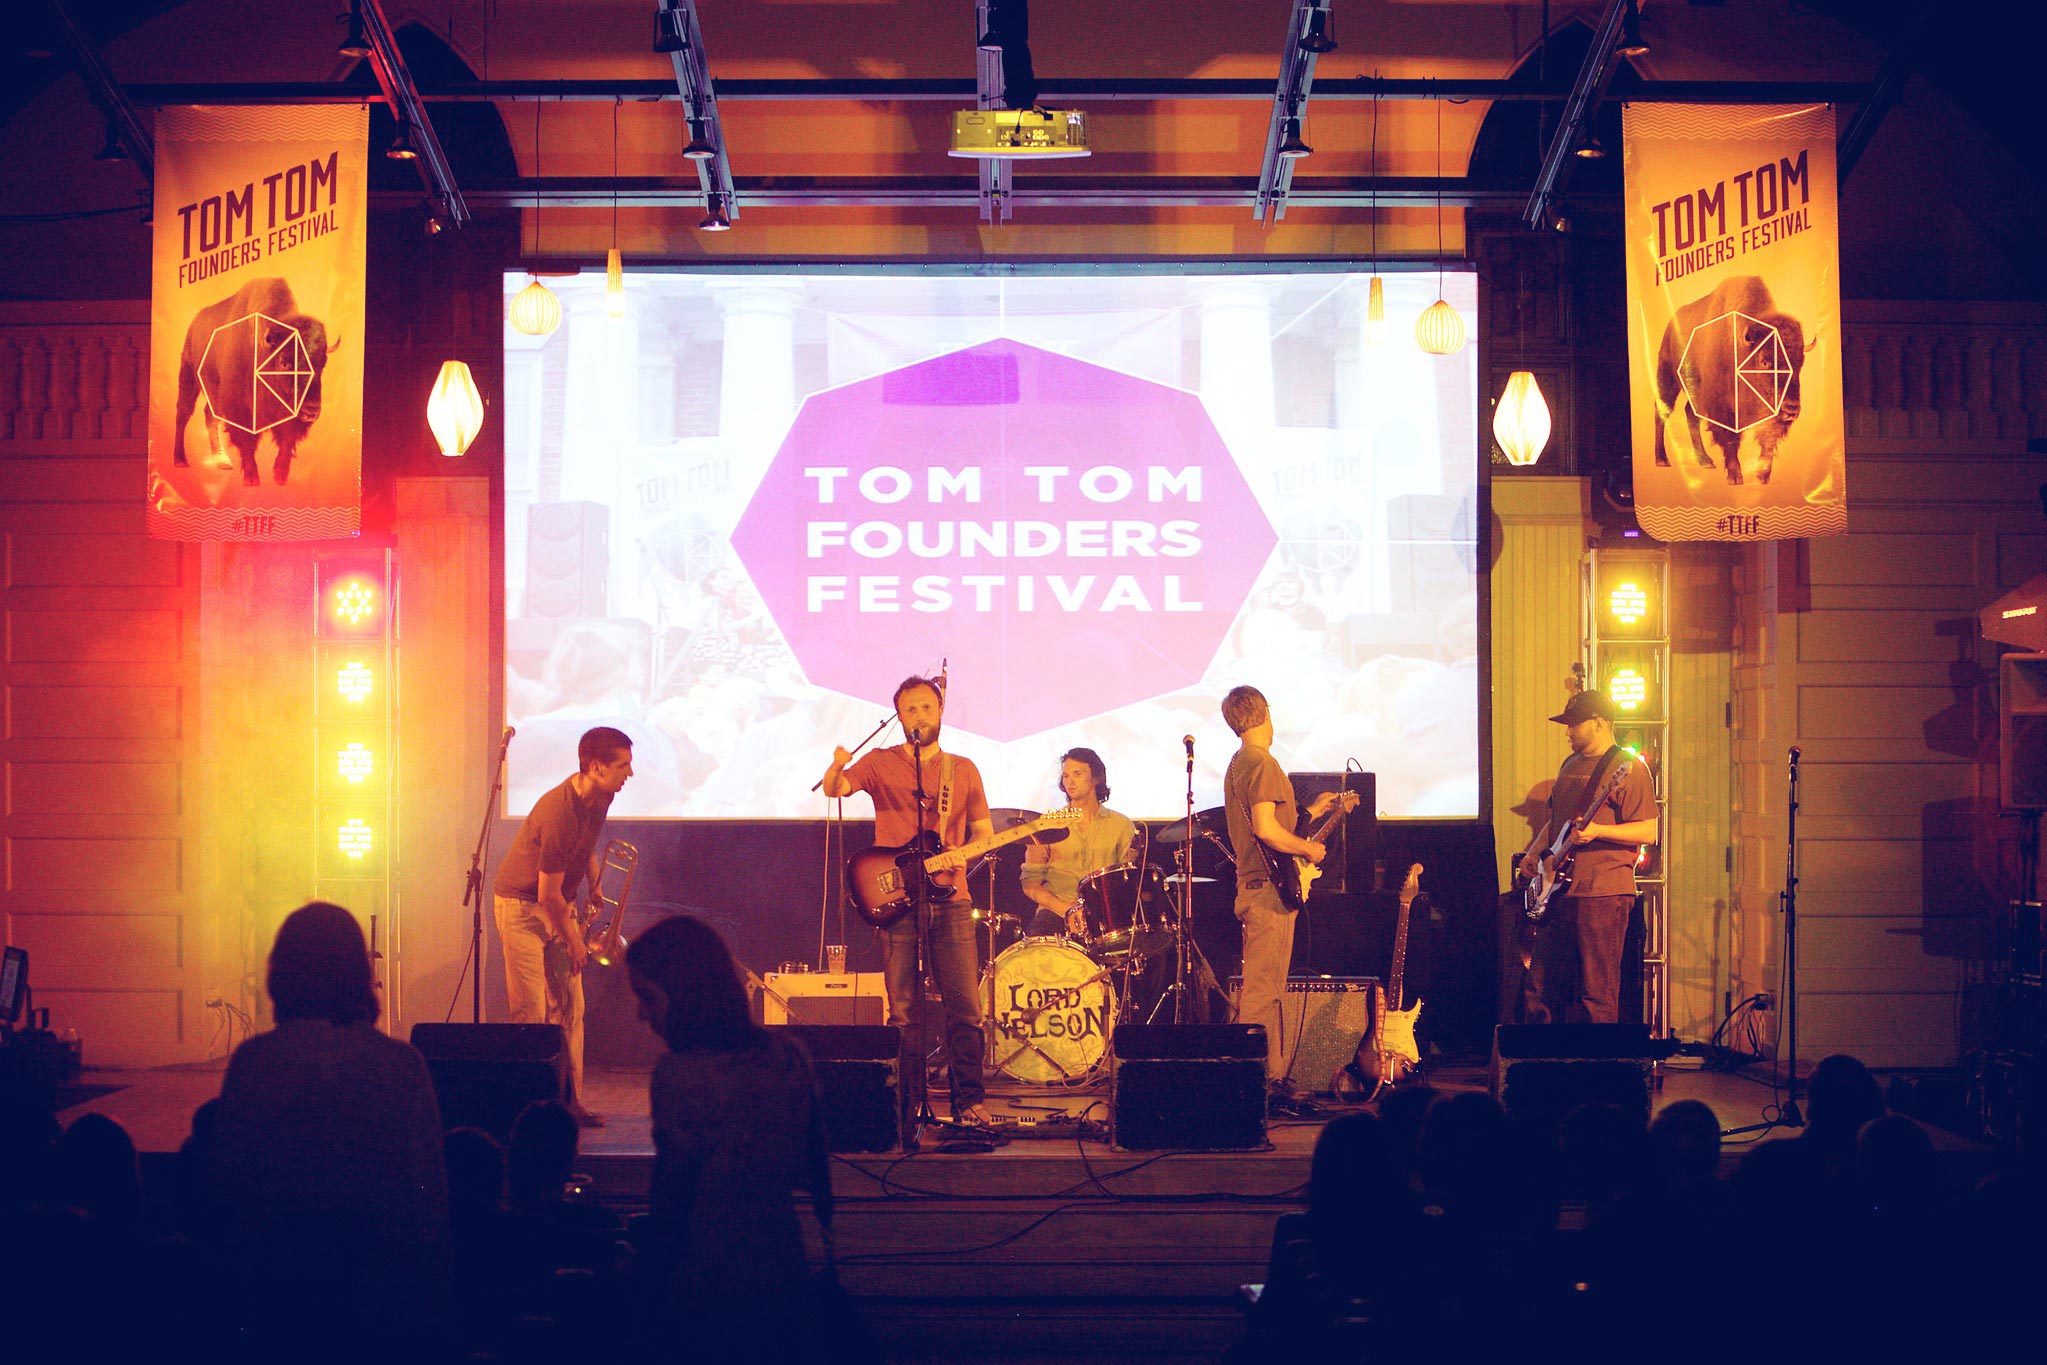 UVA, Charlottesville at the Heart of the Eighth Annual Tom Tom Founders